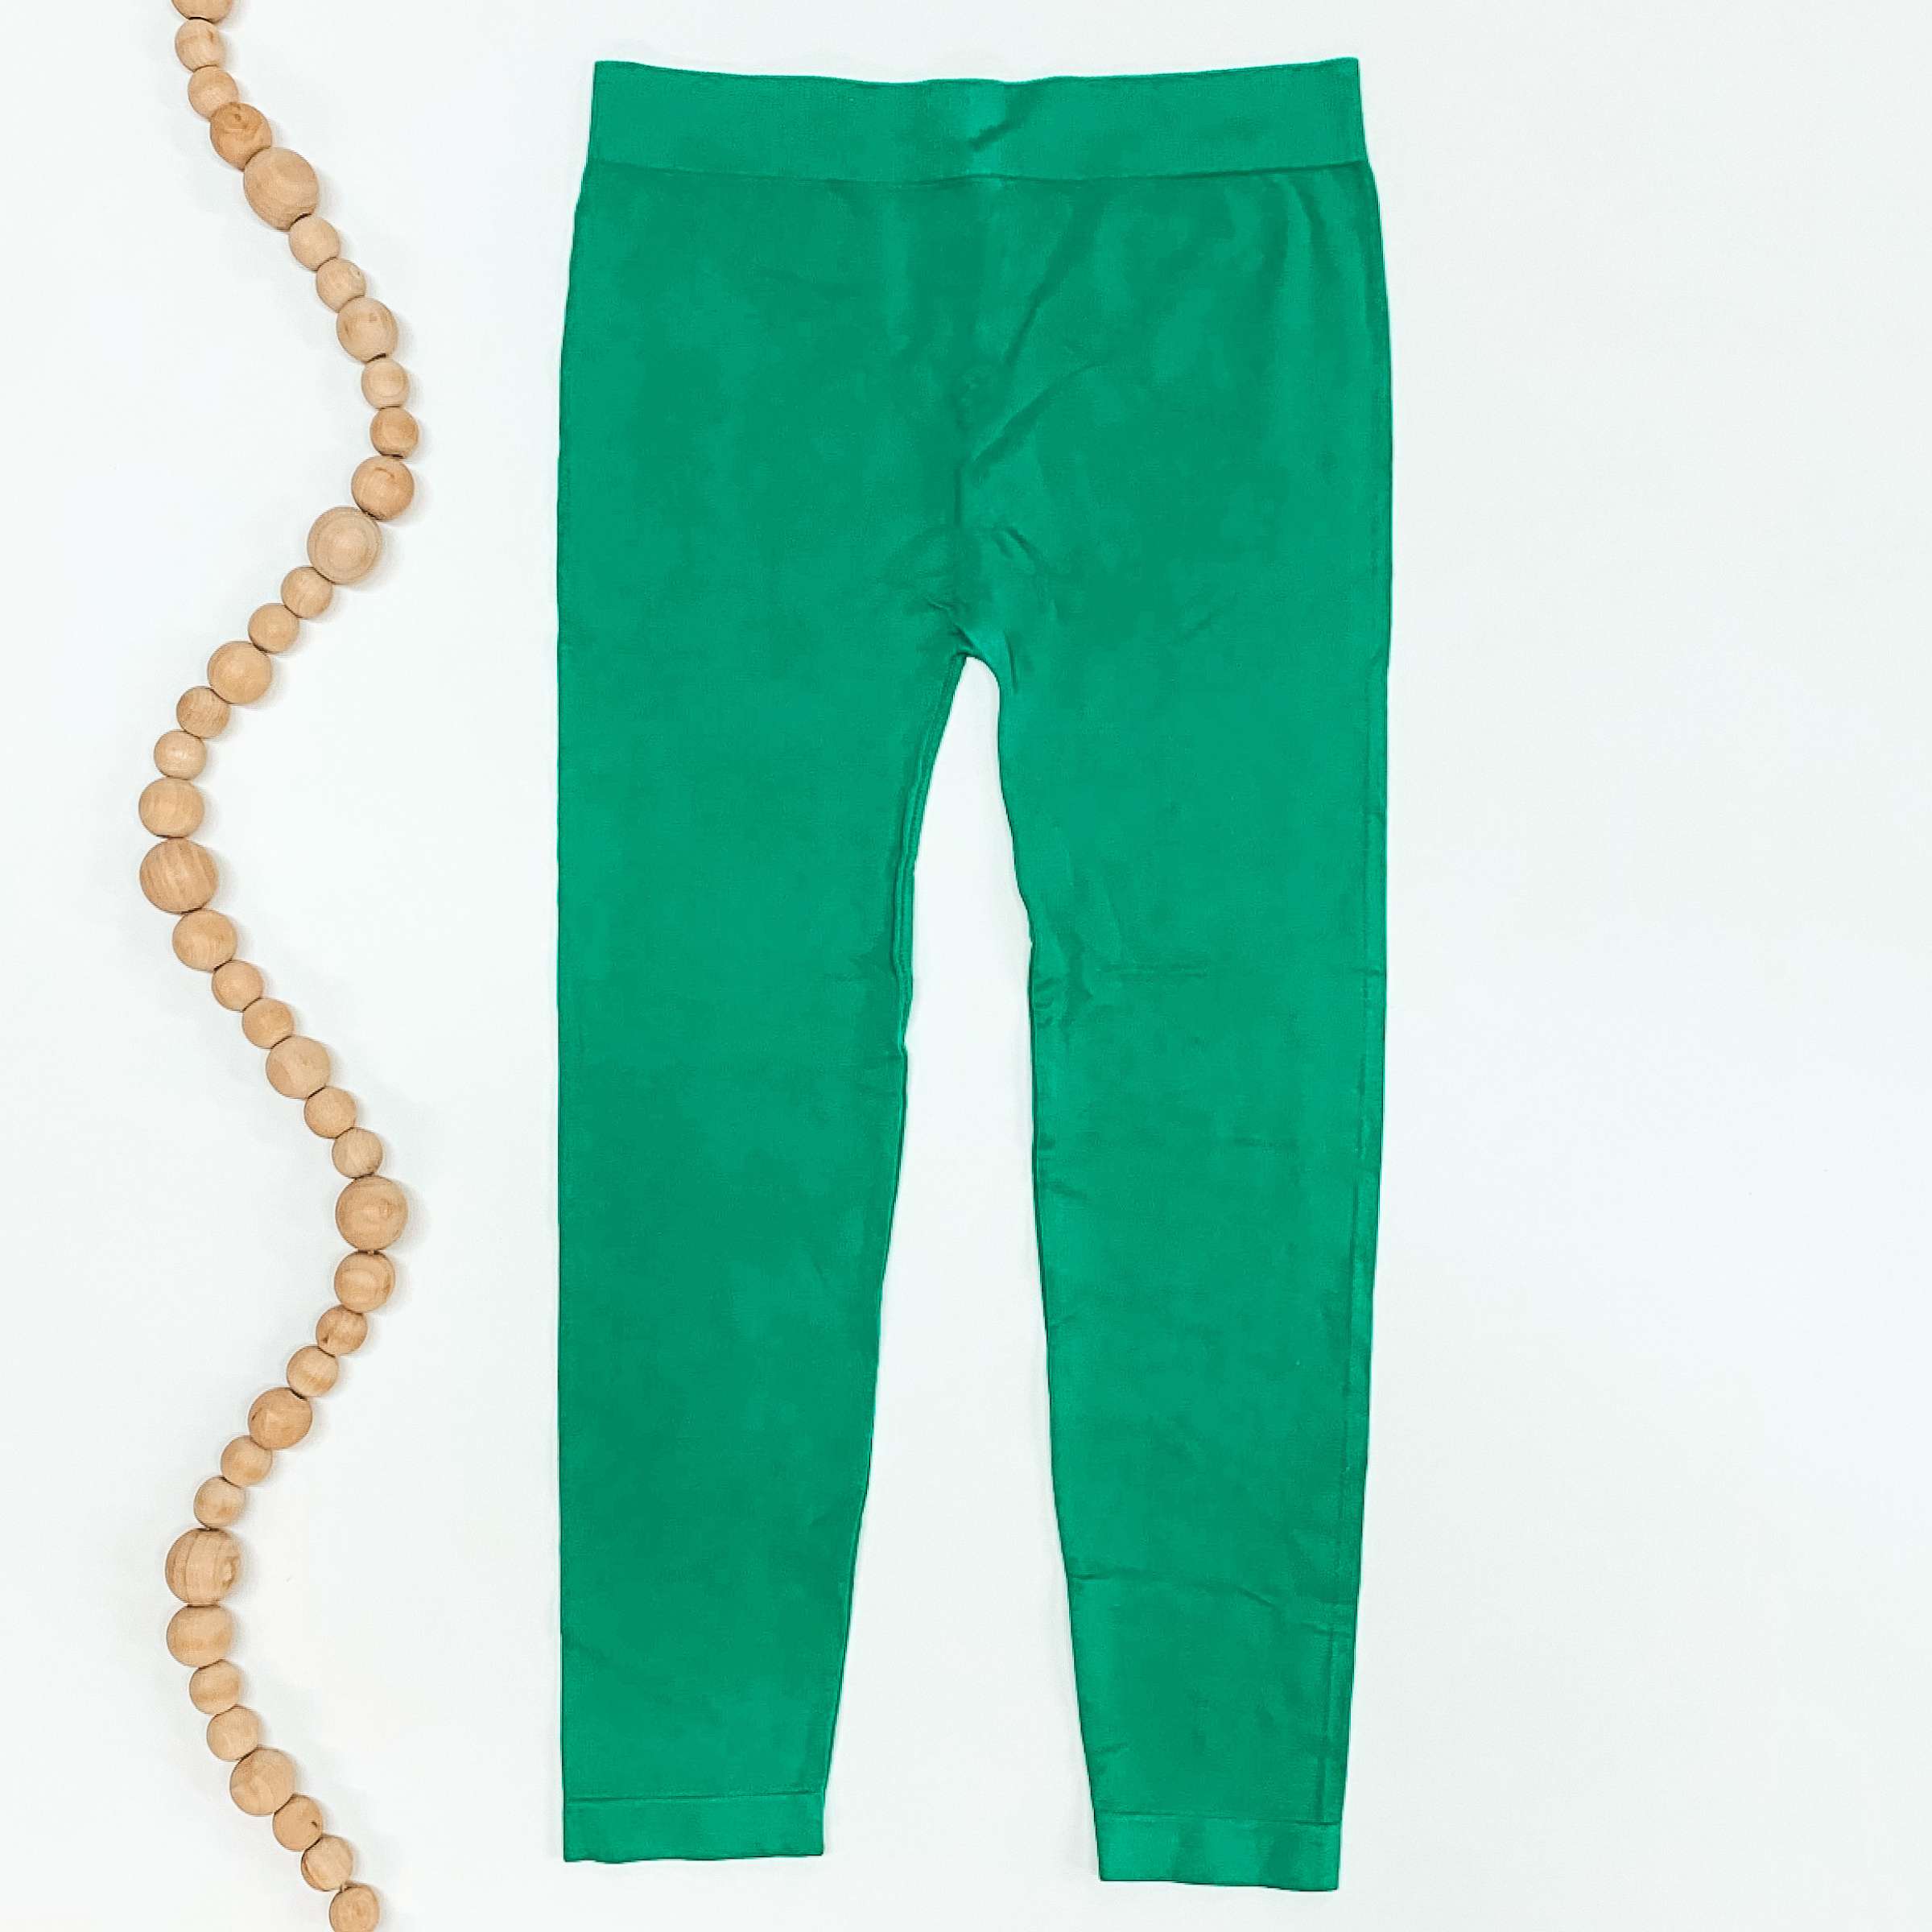 Kelly green colored leggings pictured on a white background with tan beads to the left of the leggings.